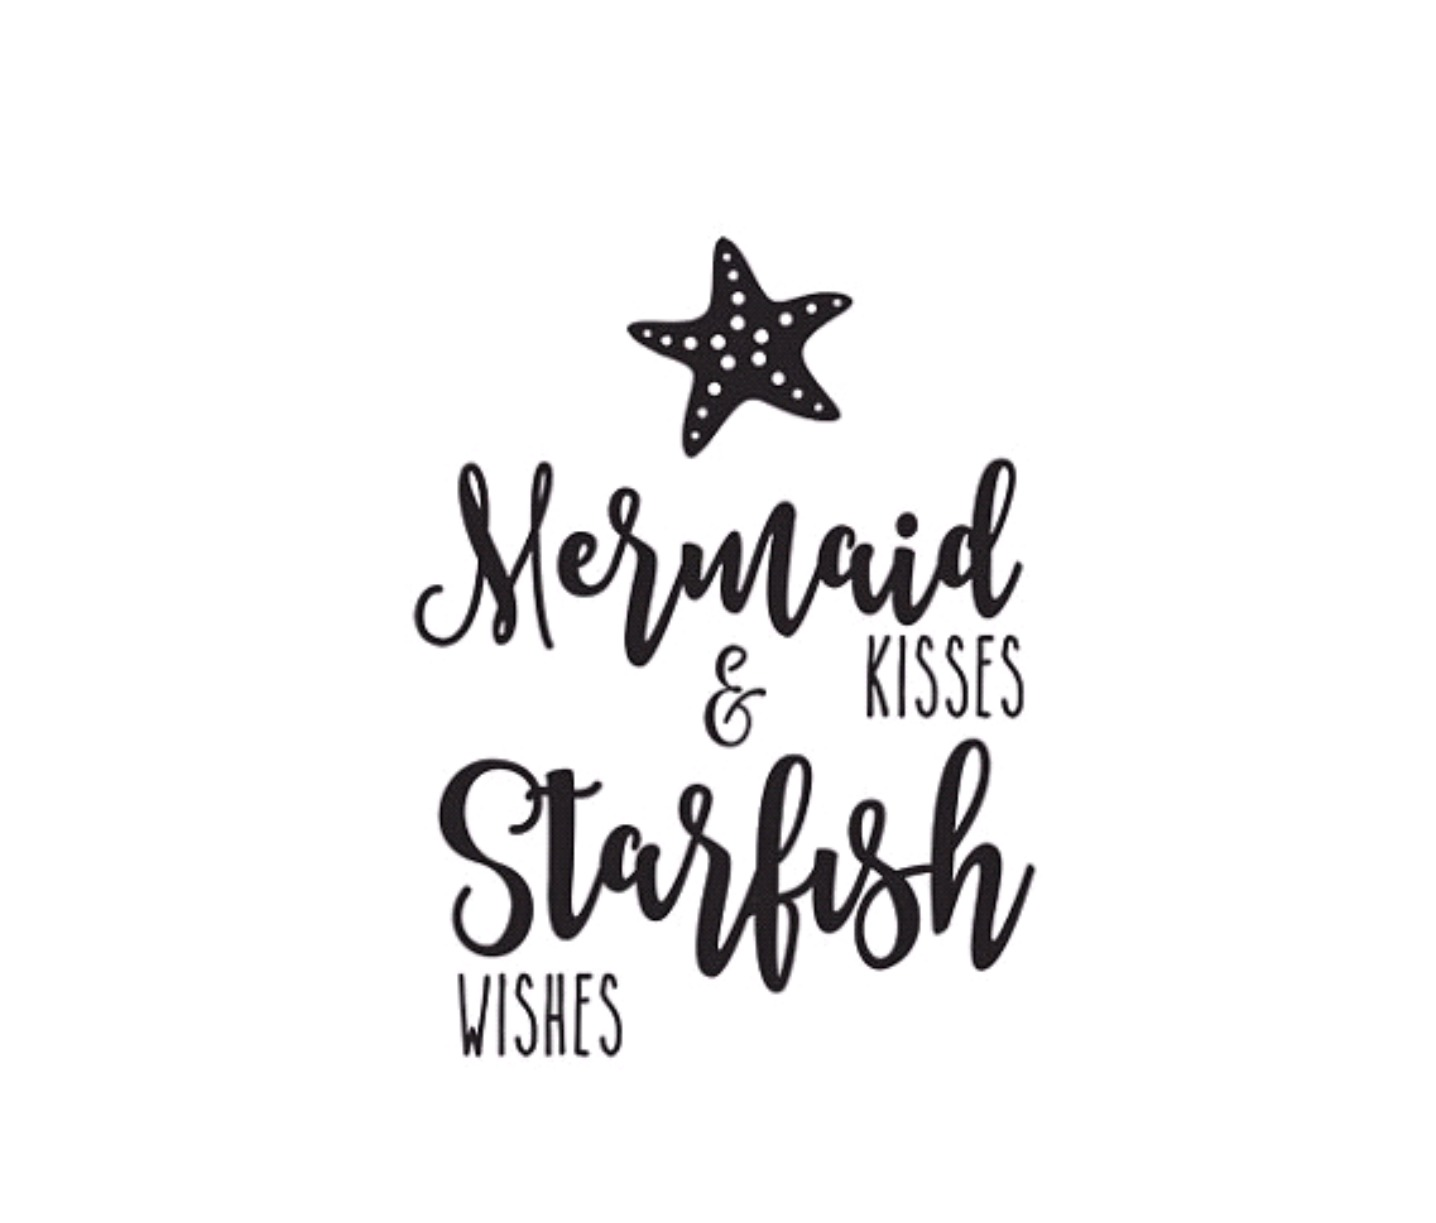 looking for both fonts used please